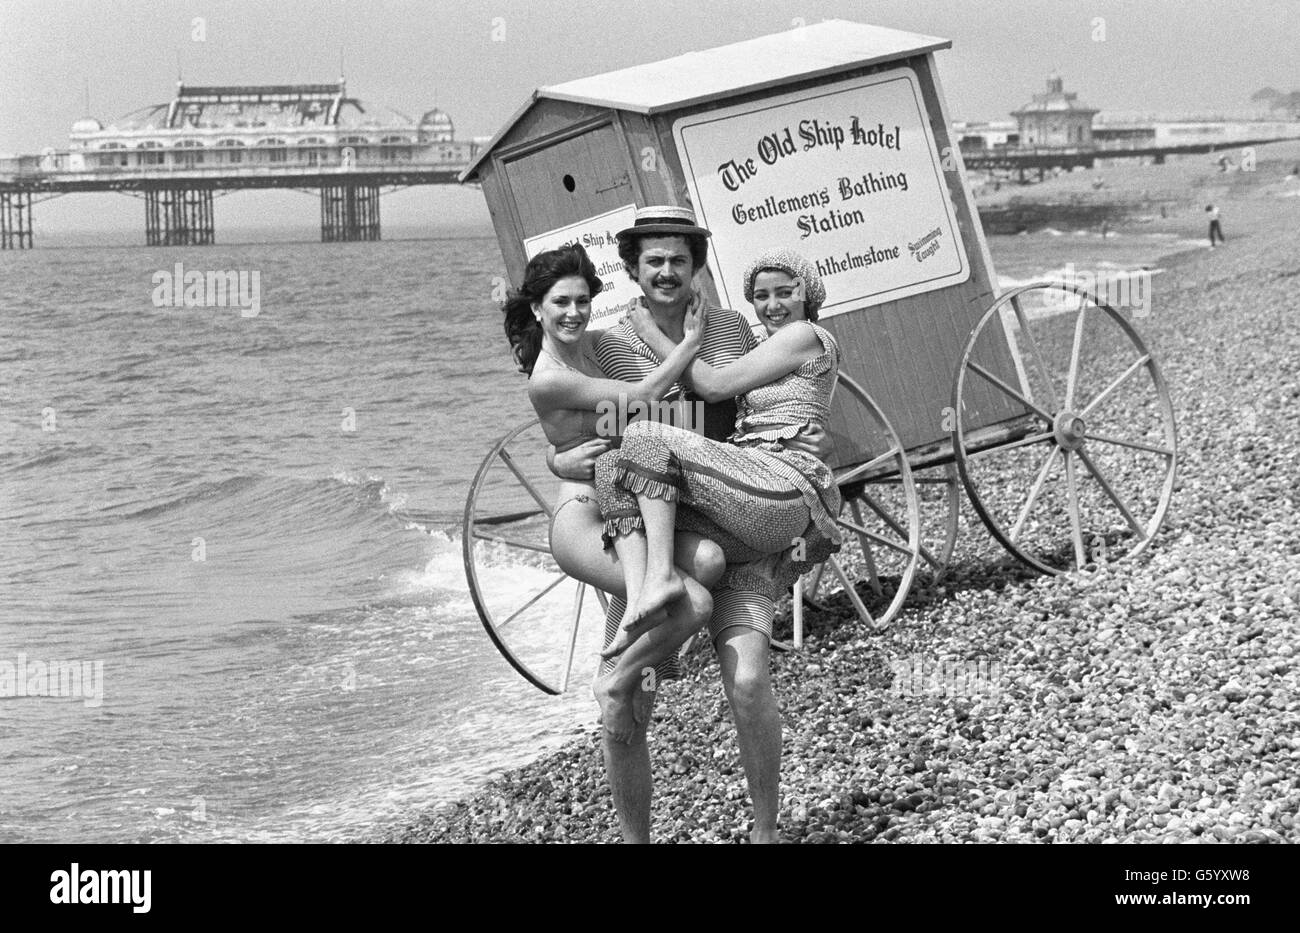 Brighton remembers its Regency heritage, helped by Nigel Phillips, Brighton belle Tracey Gunn, dressed in Regency outfit (r), and the new Miss Brighton Frances Clarke. The three posed in front of an old-fashioned bathing machine on the beach of the famous south coast resort. Stock Photo